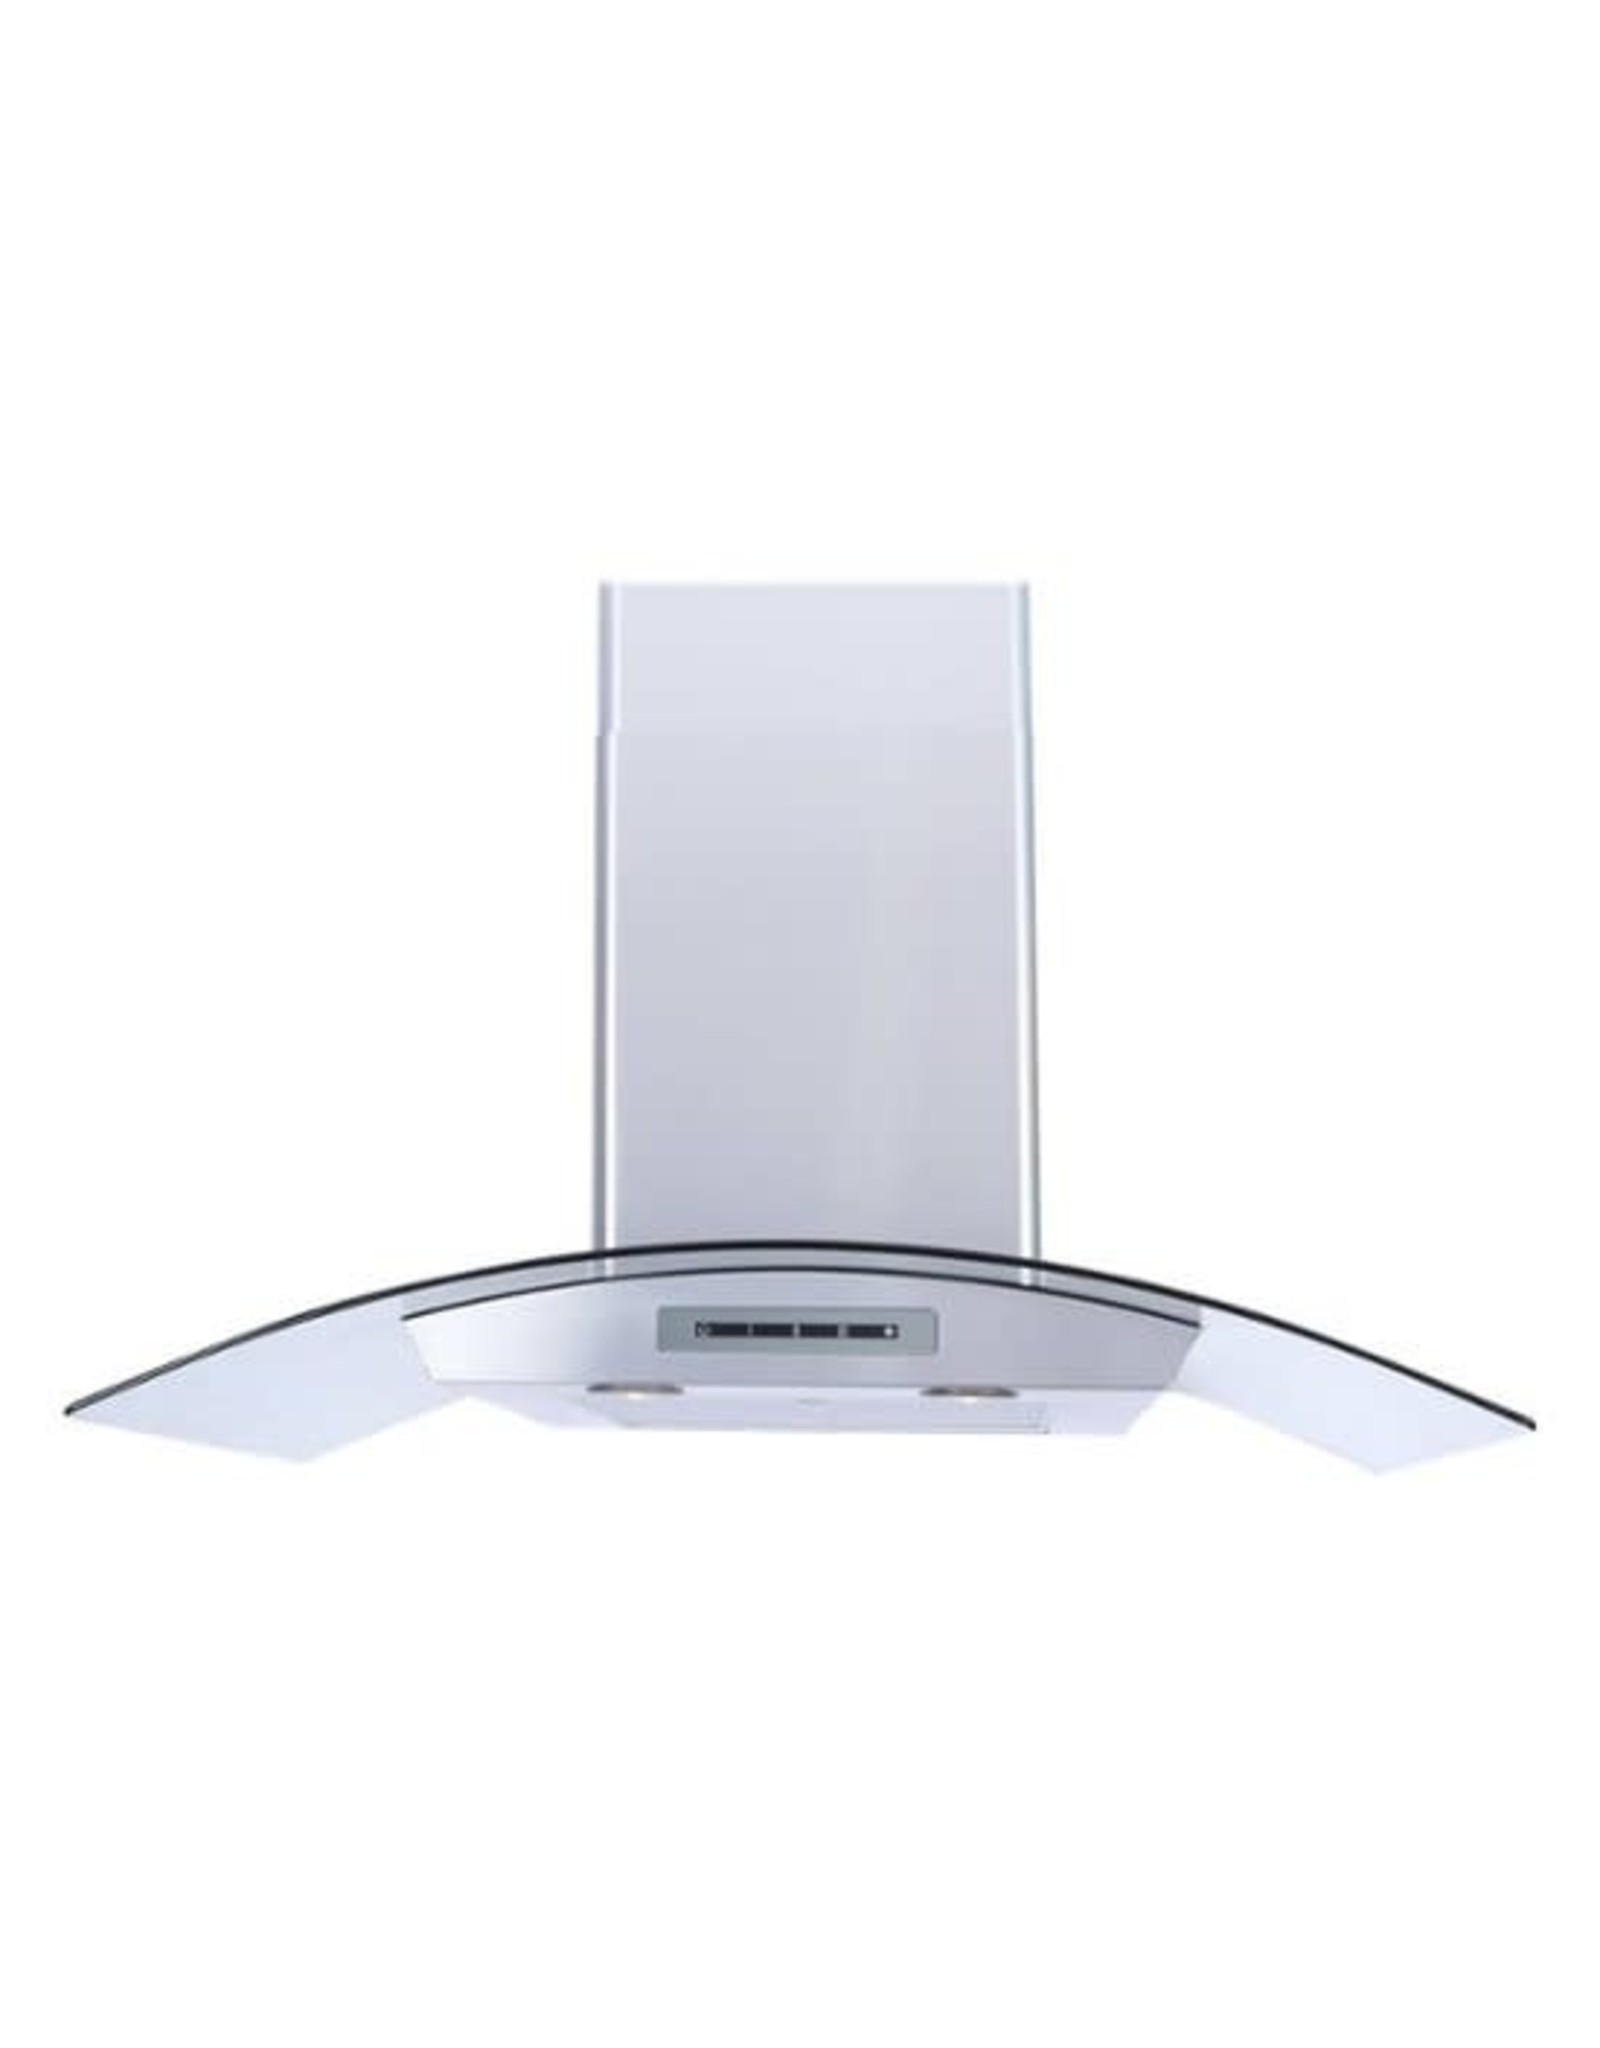 WINDSTER WS-62N30SS Windster Hoods - 30" Convertible Range Hood - Stainless steel and glass